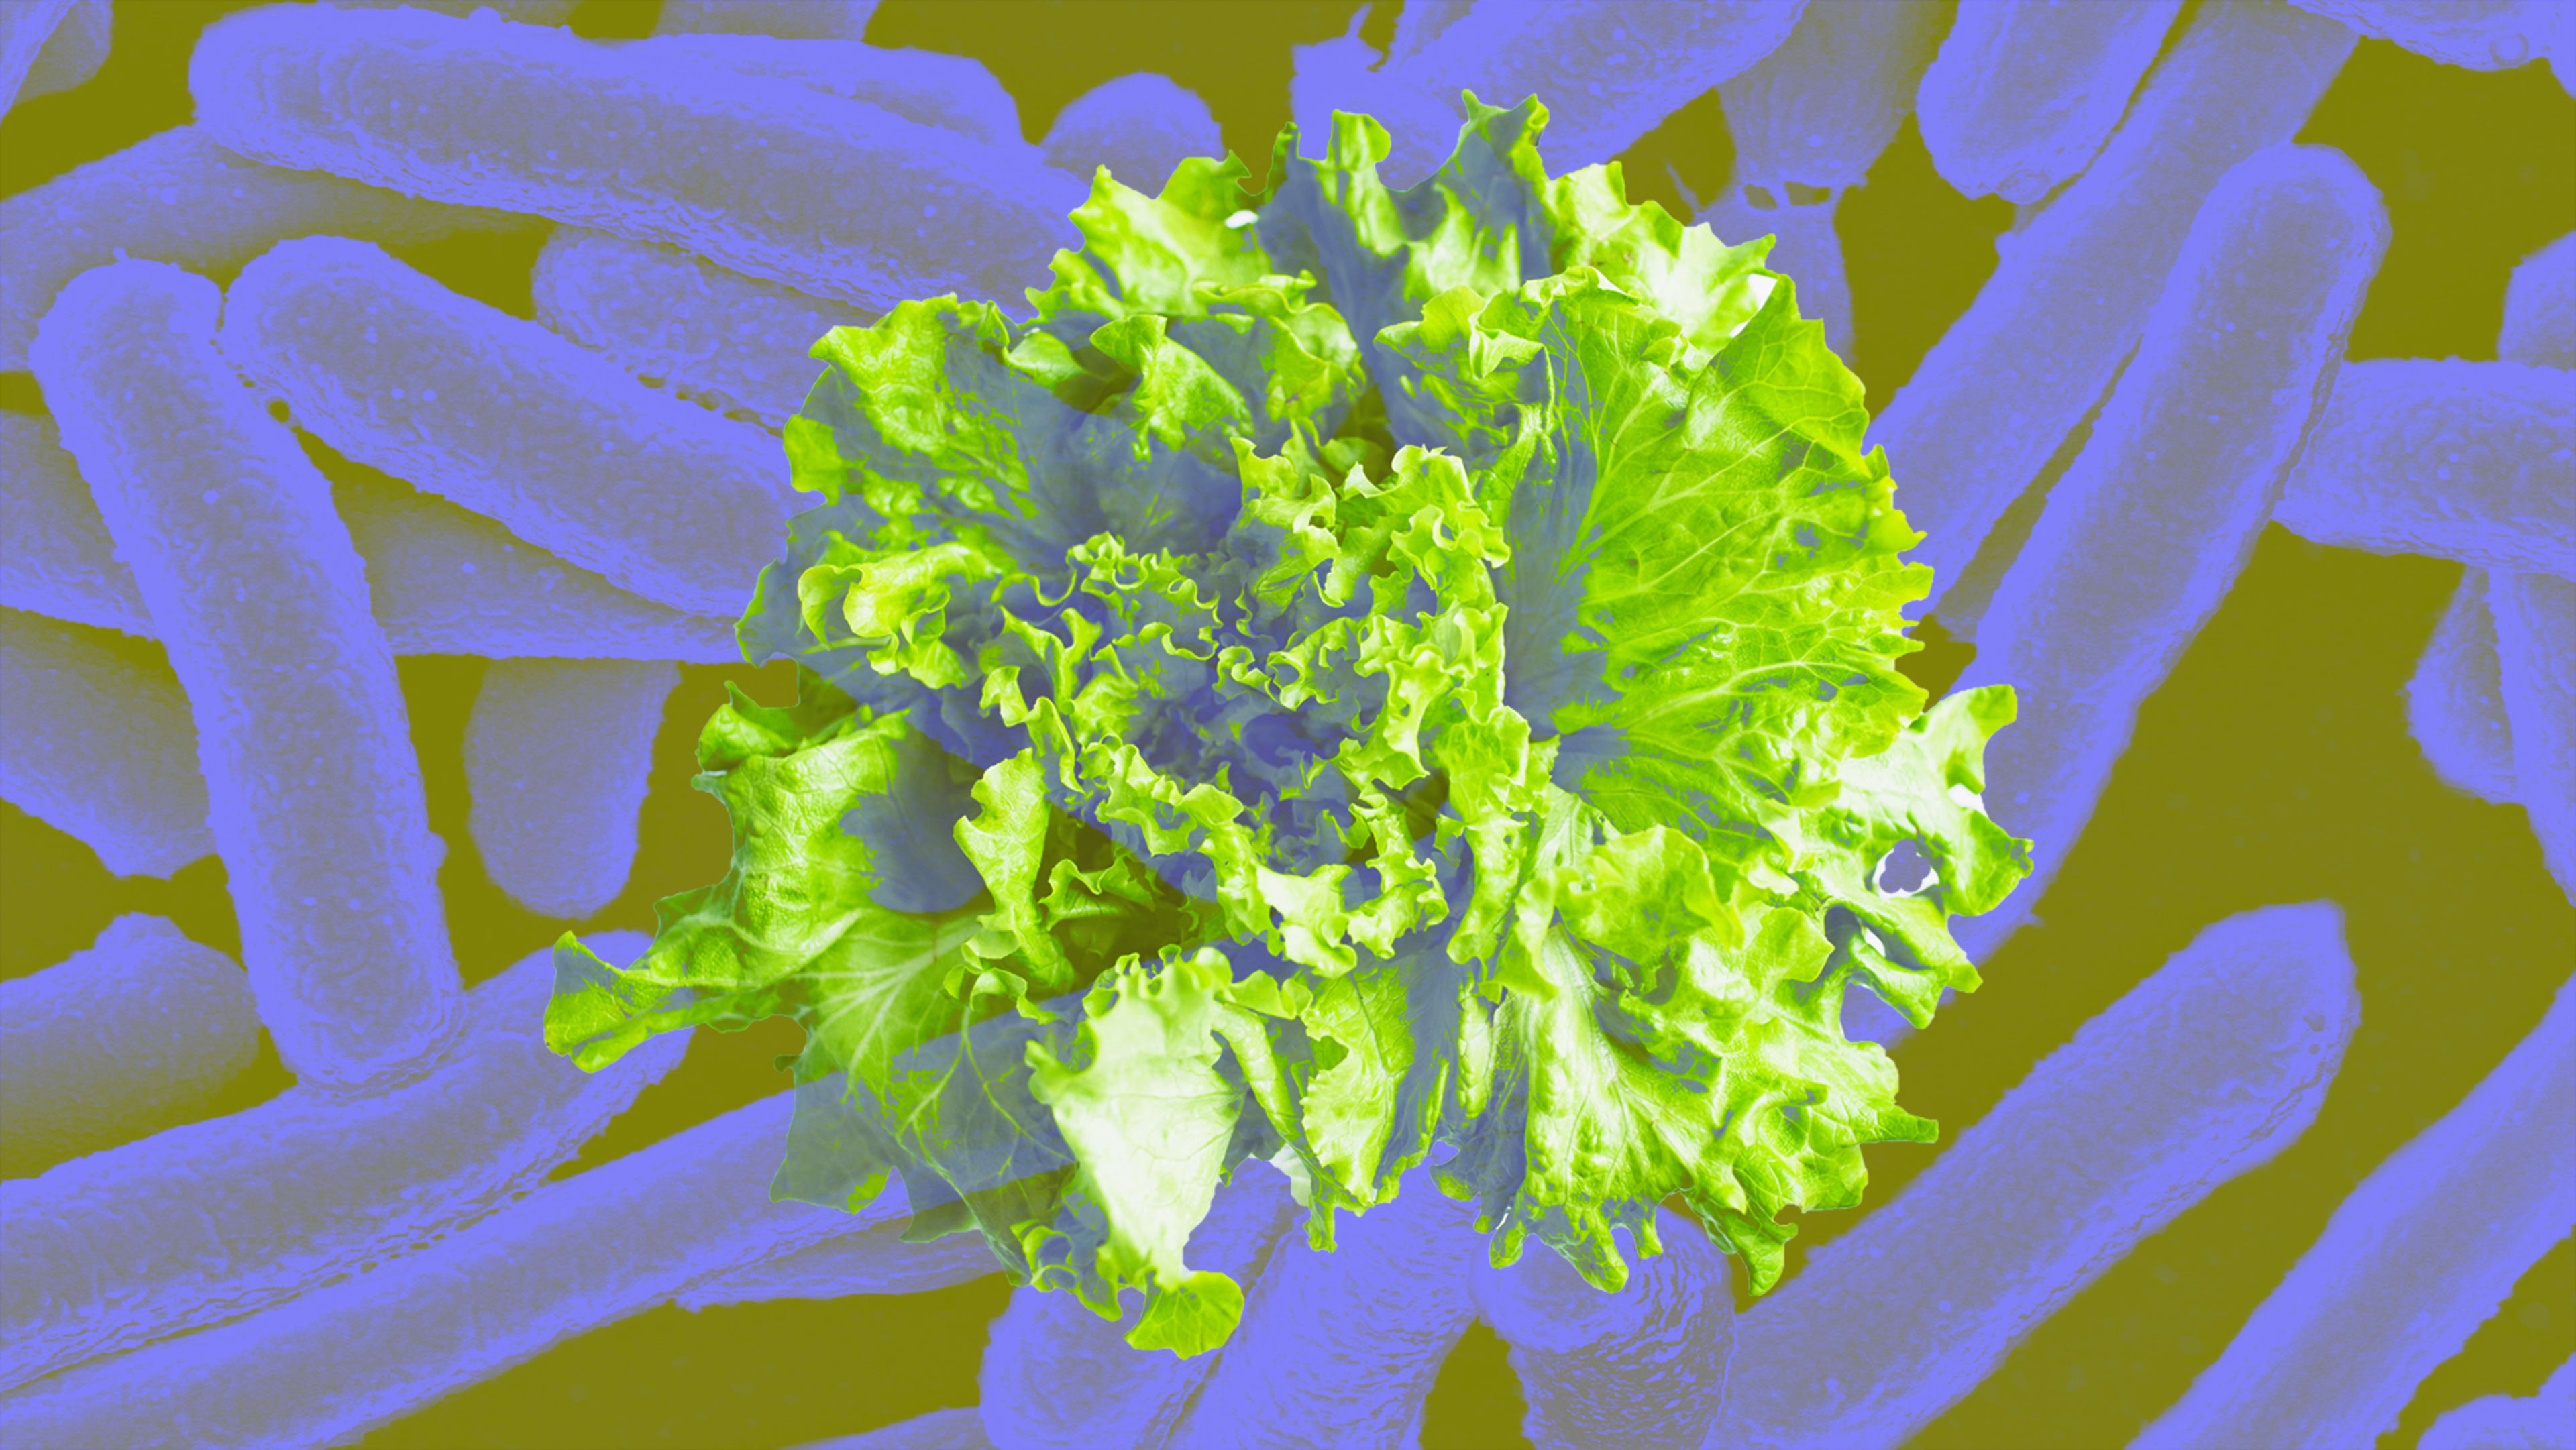 CDC: Don’t eat romaine lettuce and take action if you have E. coli infection symptoms